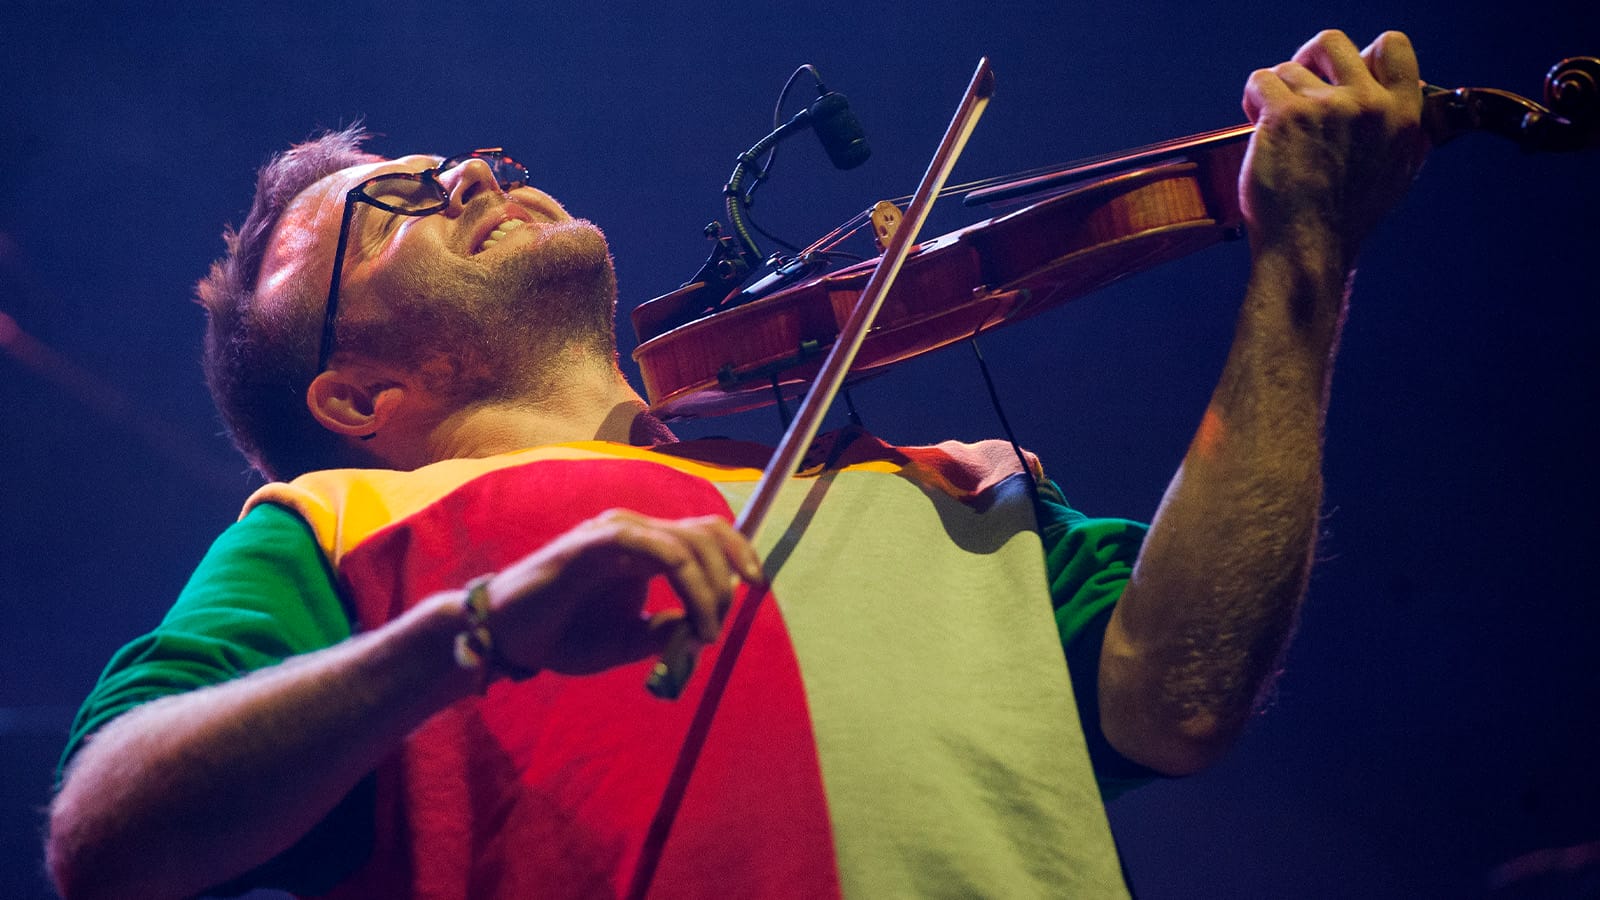 A man in a red and yellow t shirt plays the fiddle